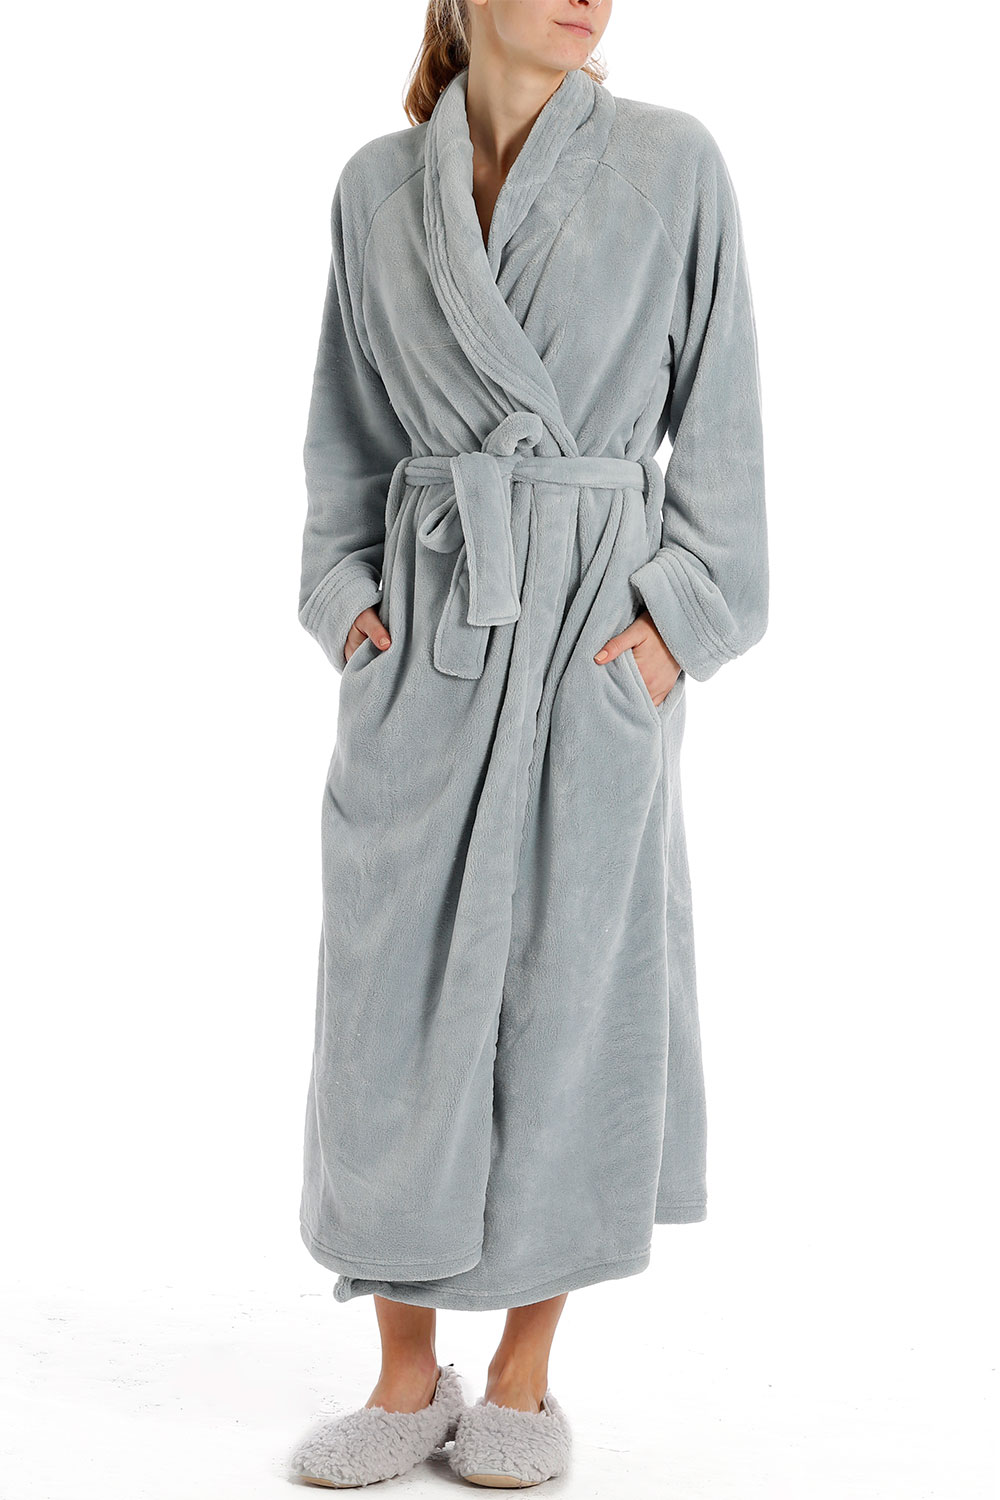 very ladies dressing gowns